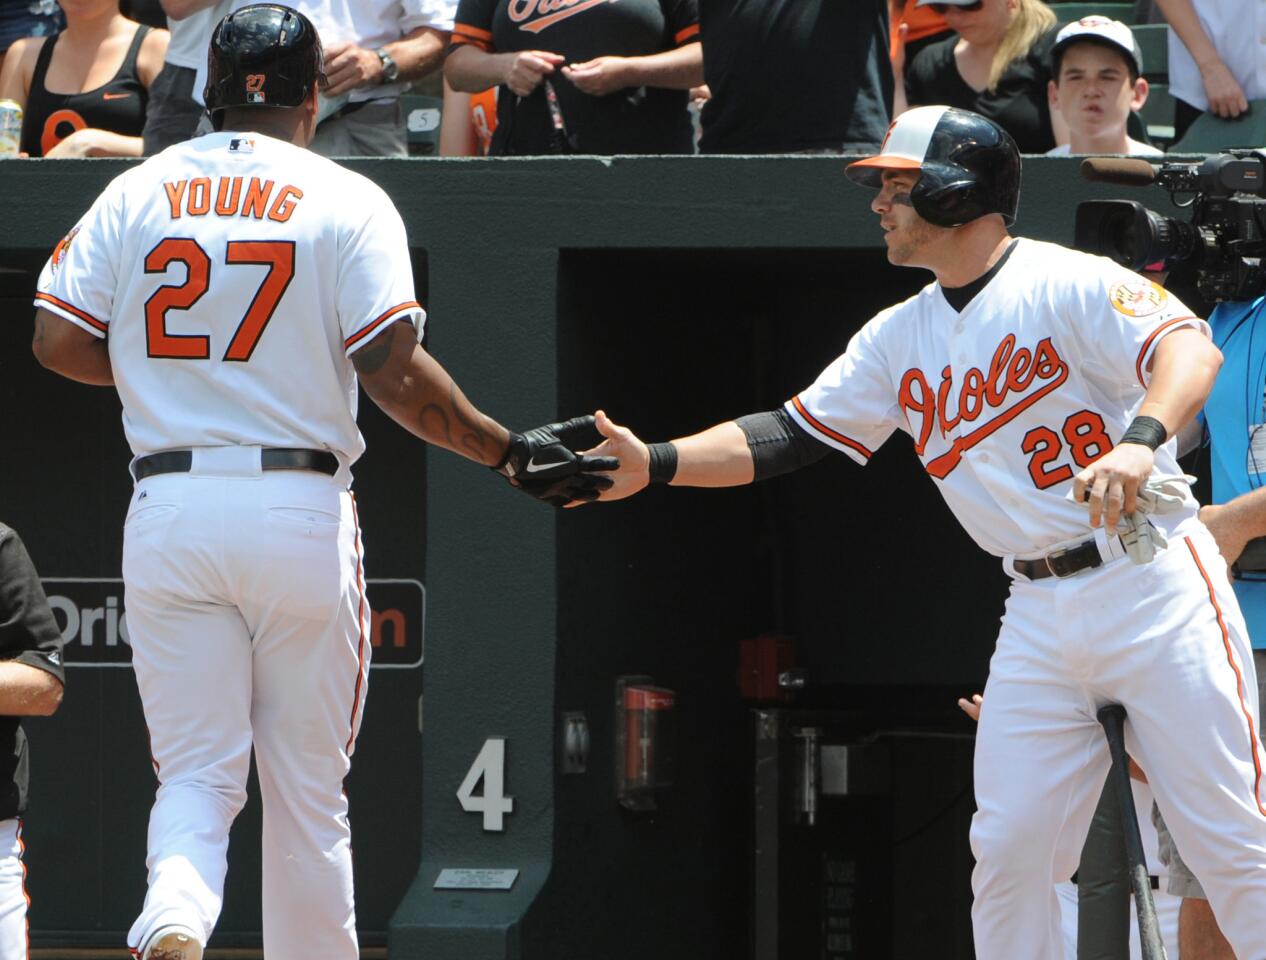 Delmon Young and Steve Pearce